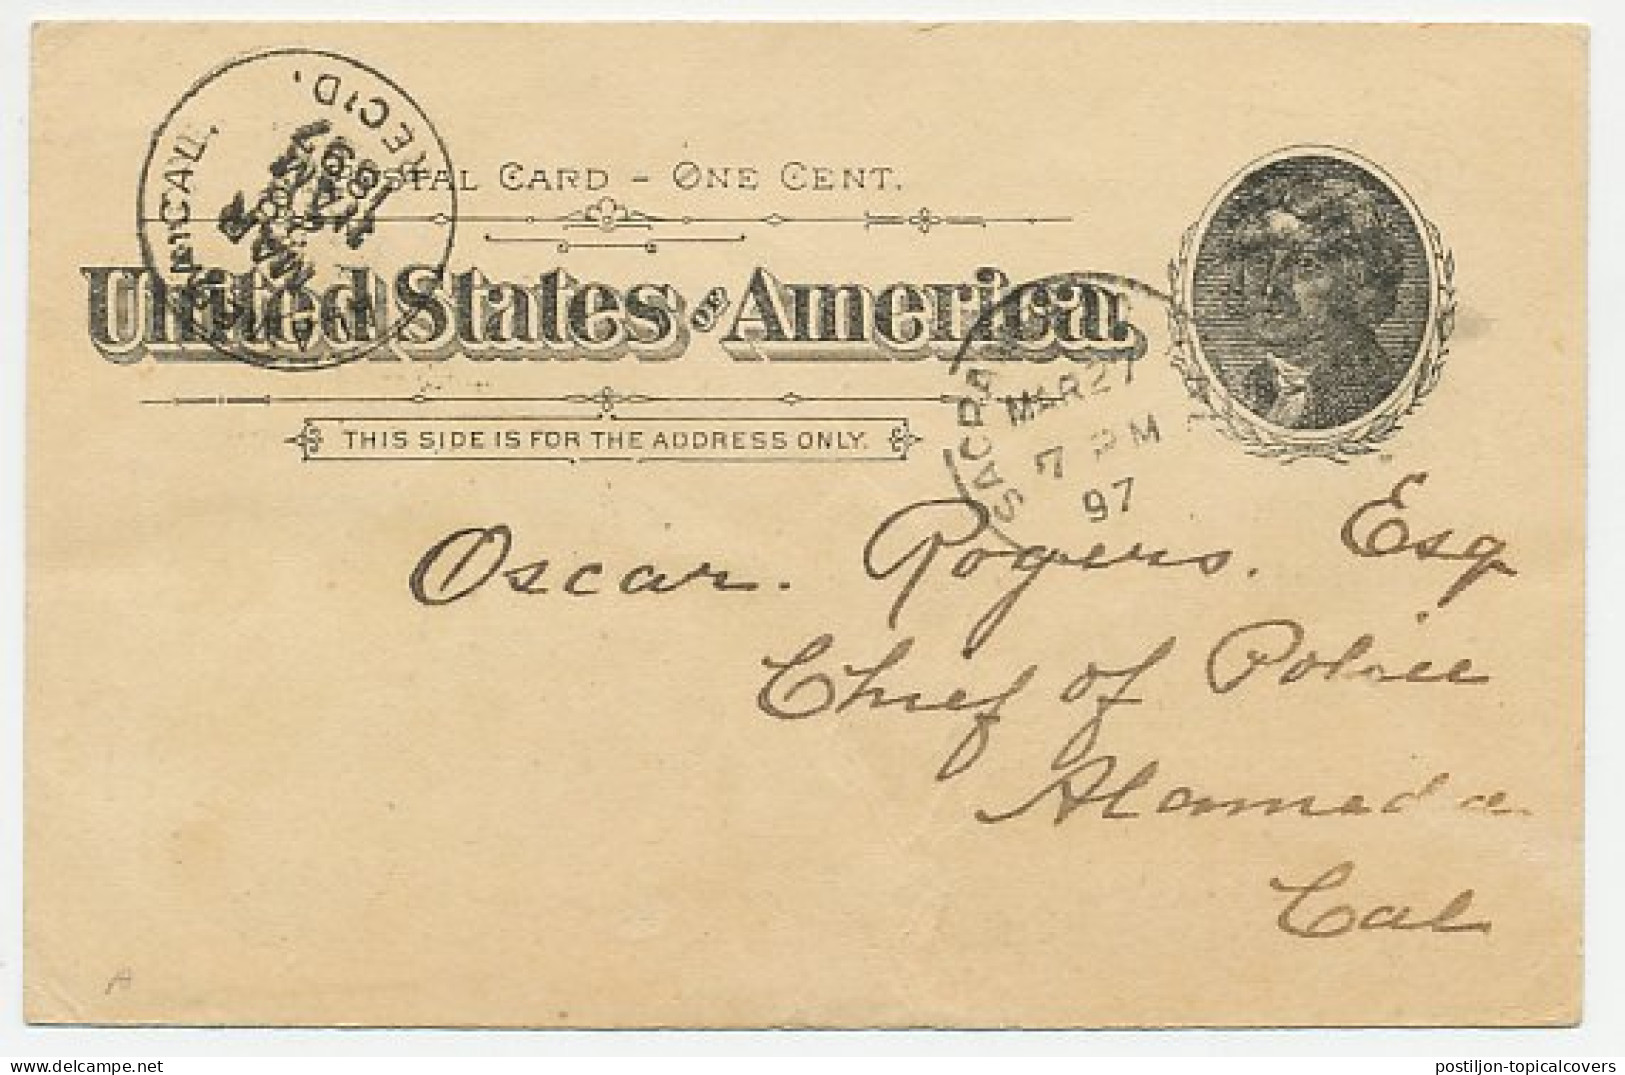 Postal Stationery USA 1897 Search Notice - Stolen Horse - Horses